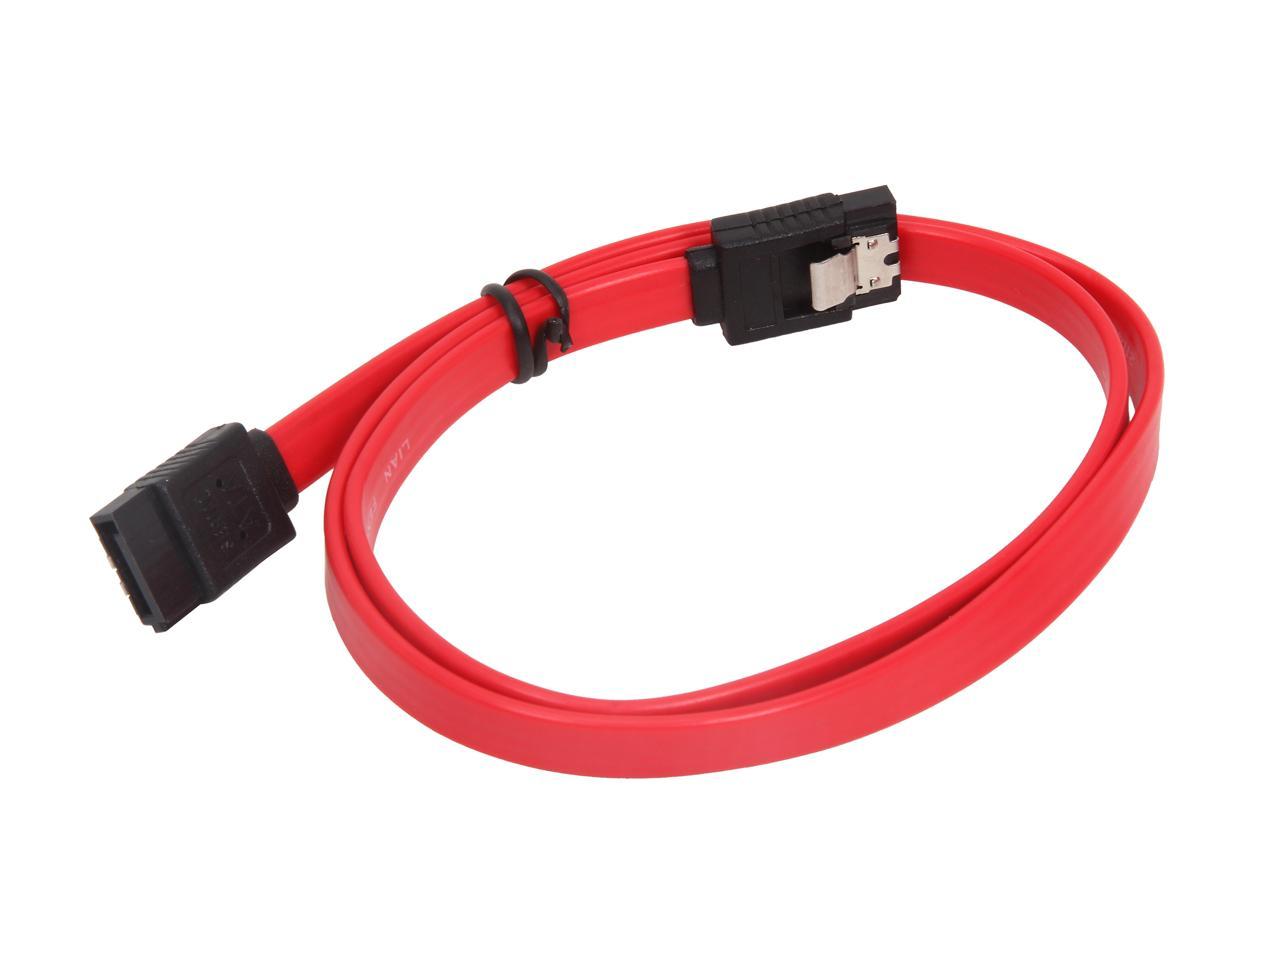 Vcom Ch301-24Inch 24Inch Sata2 To Sata2 Cable W/ Locking Latch (Red)